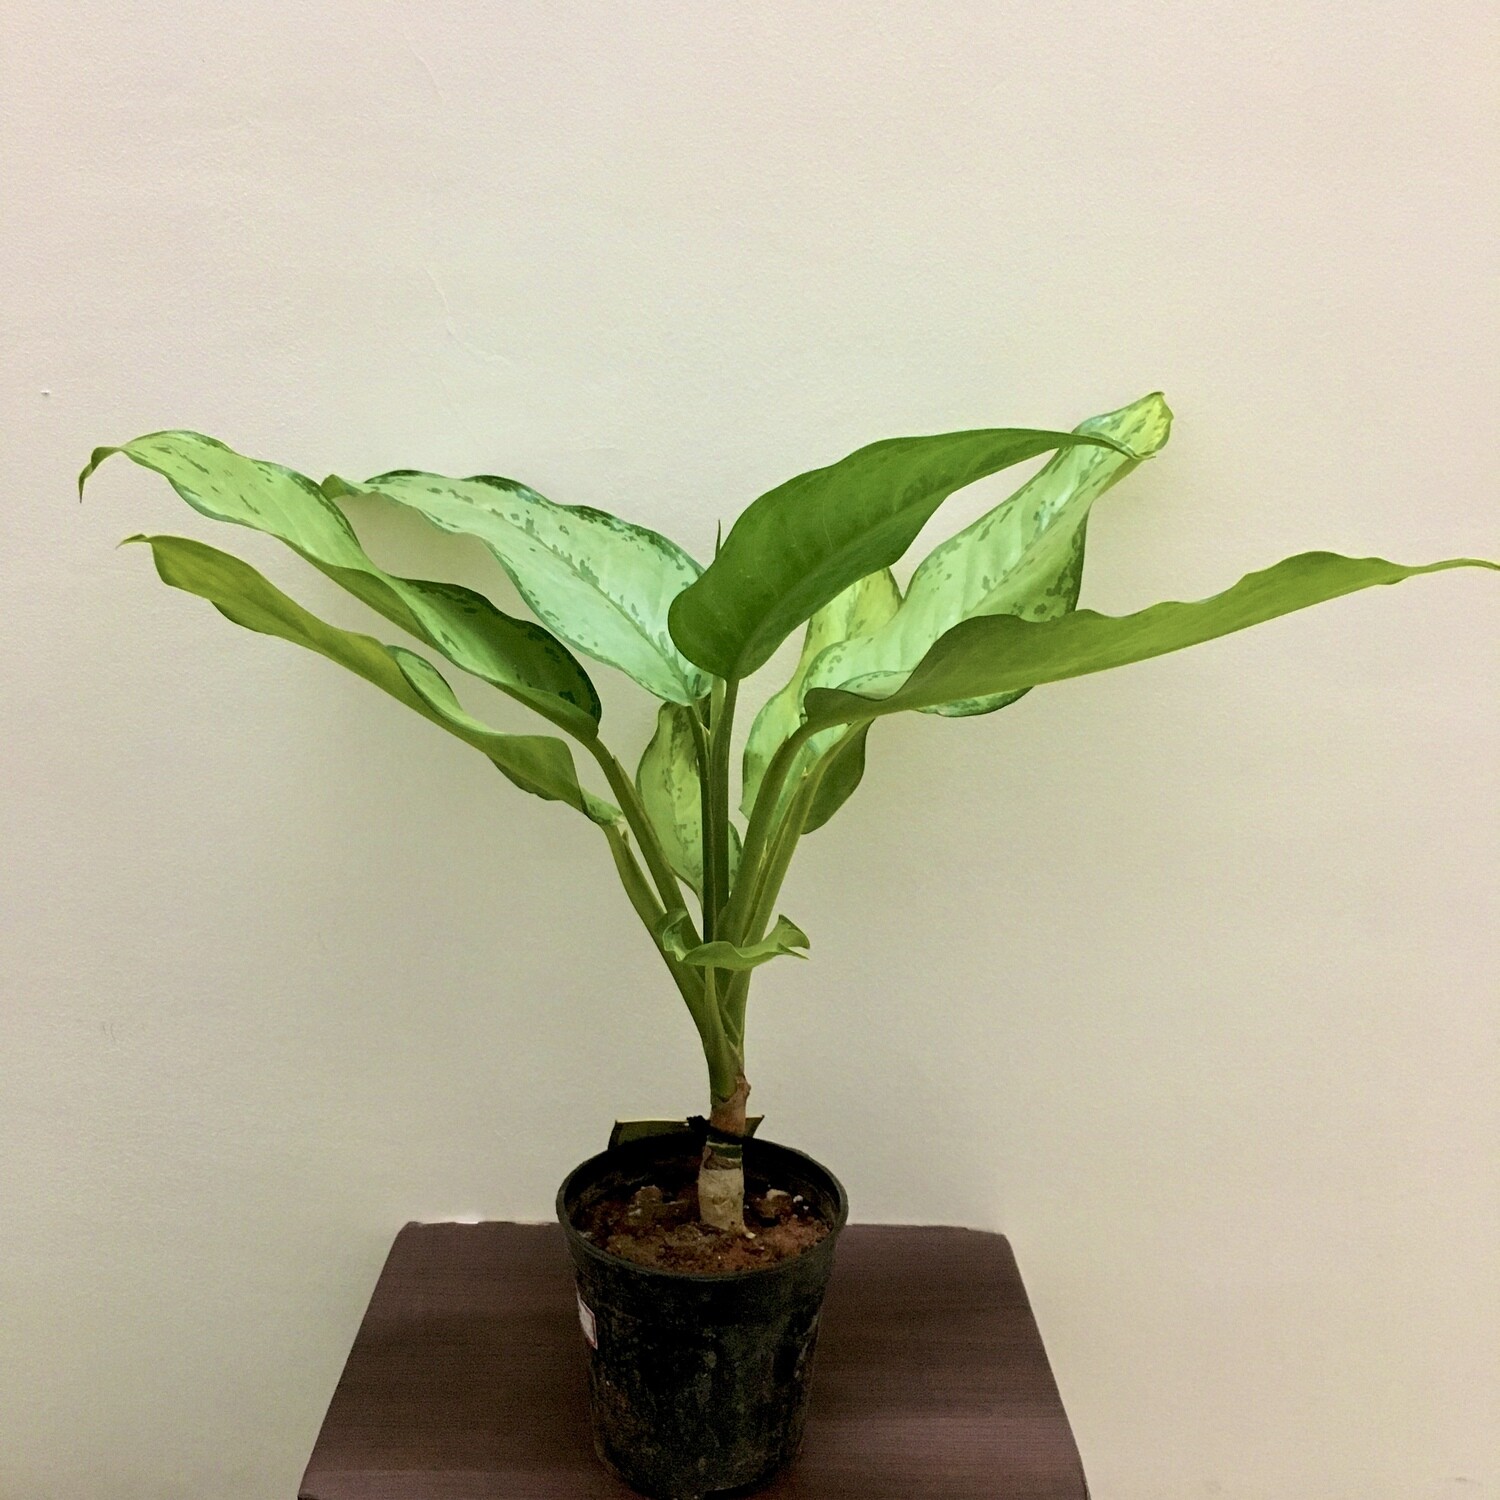 Aglaonema Green Plant - Chinese Evergreen in 4 inches Nursery Pot